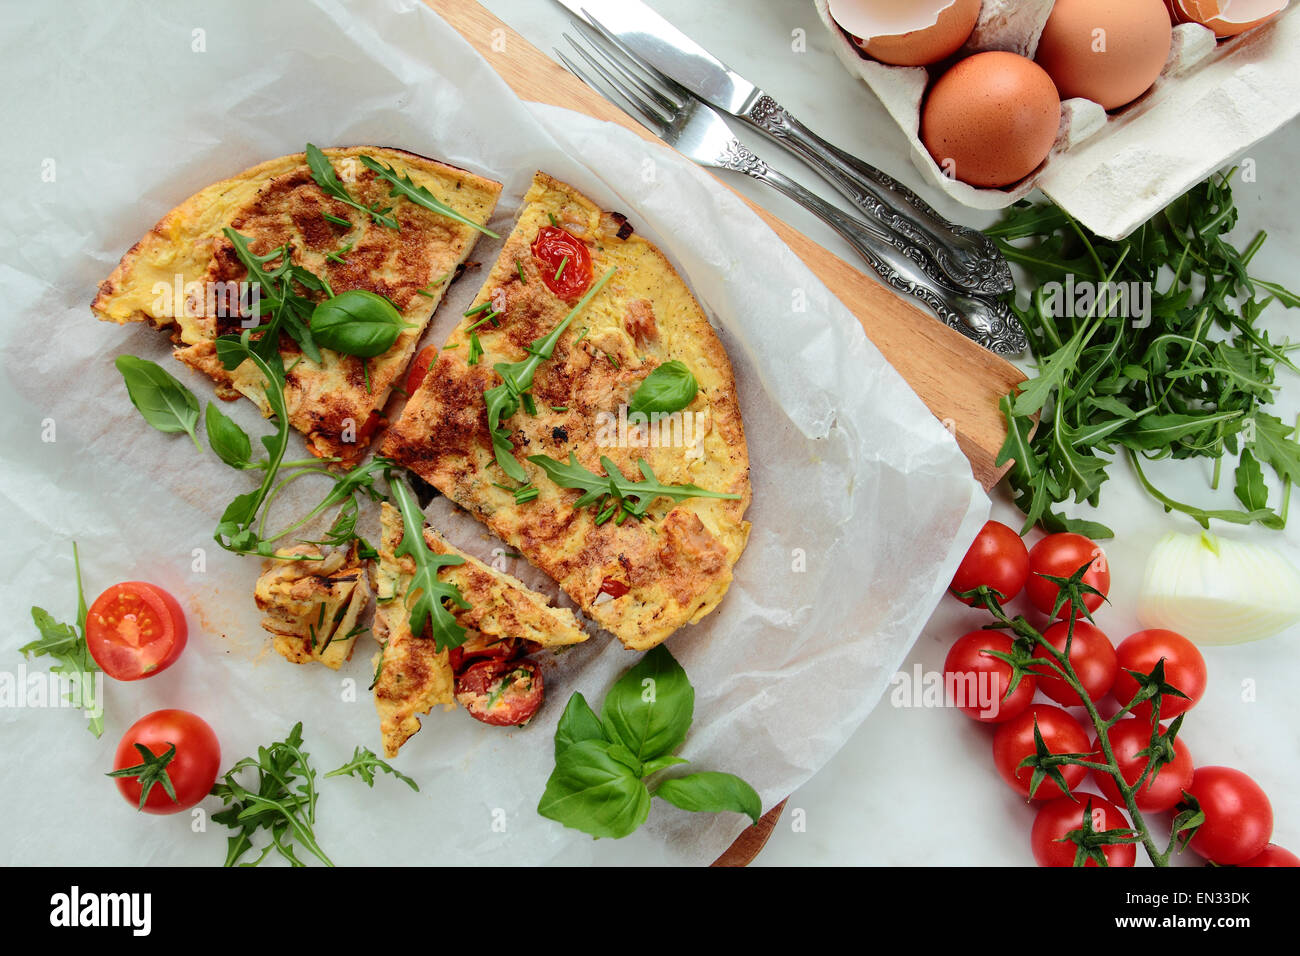 Omelet with fresh rucola salad and tomatoes Stock Photo